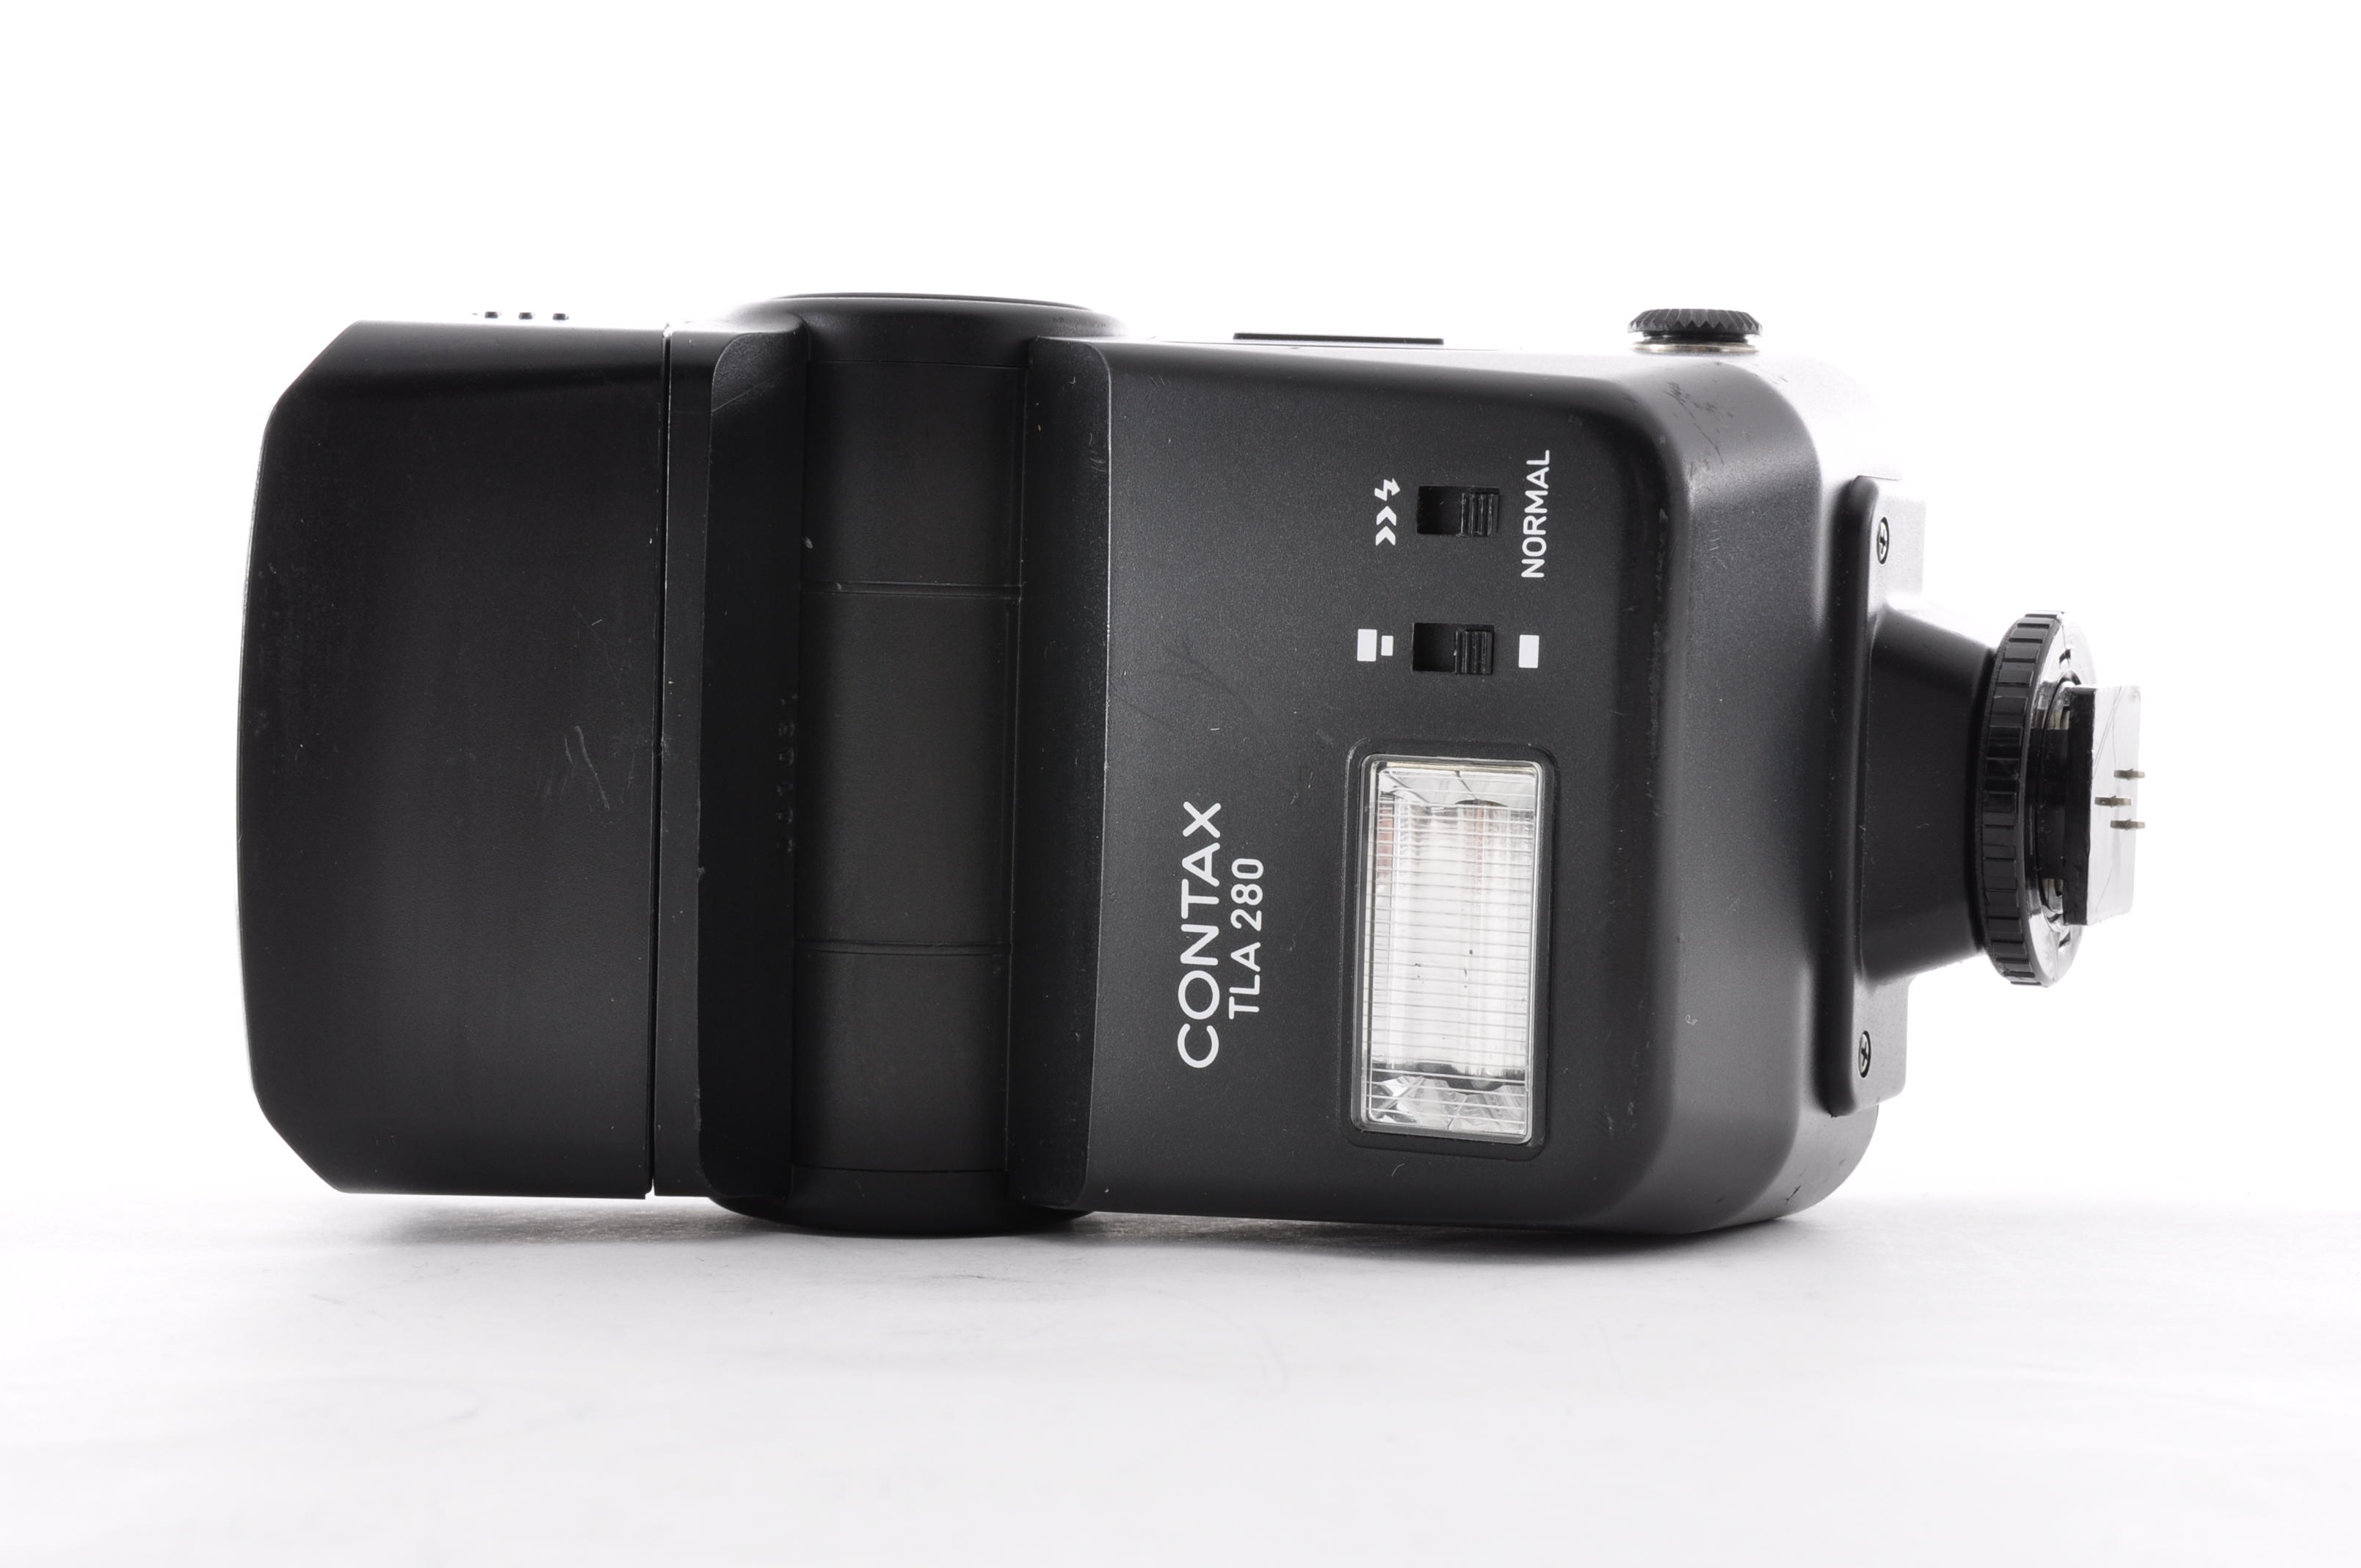 [Excellent] Contax TLA 280 Shoe Mount Flash For Contax SLR From Japan img02